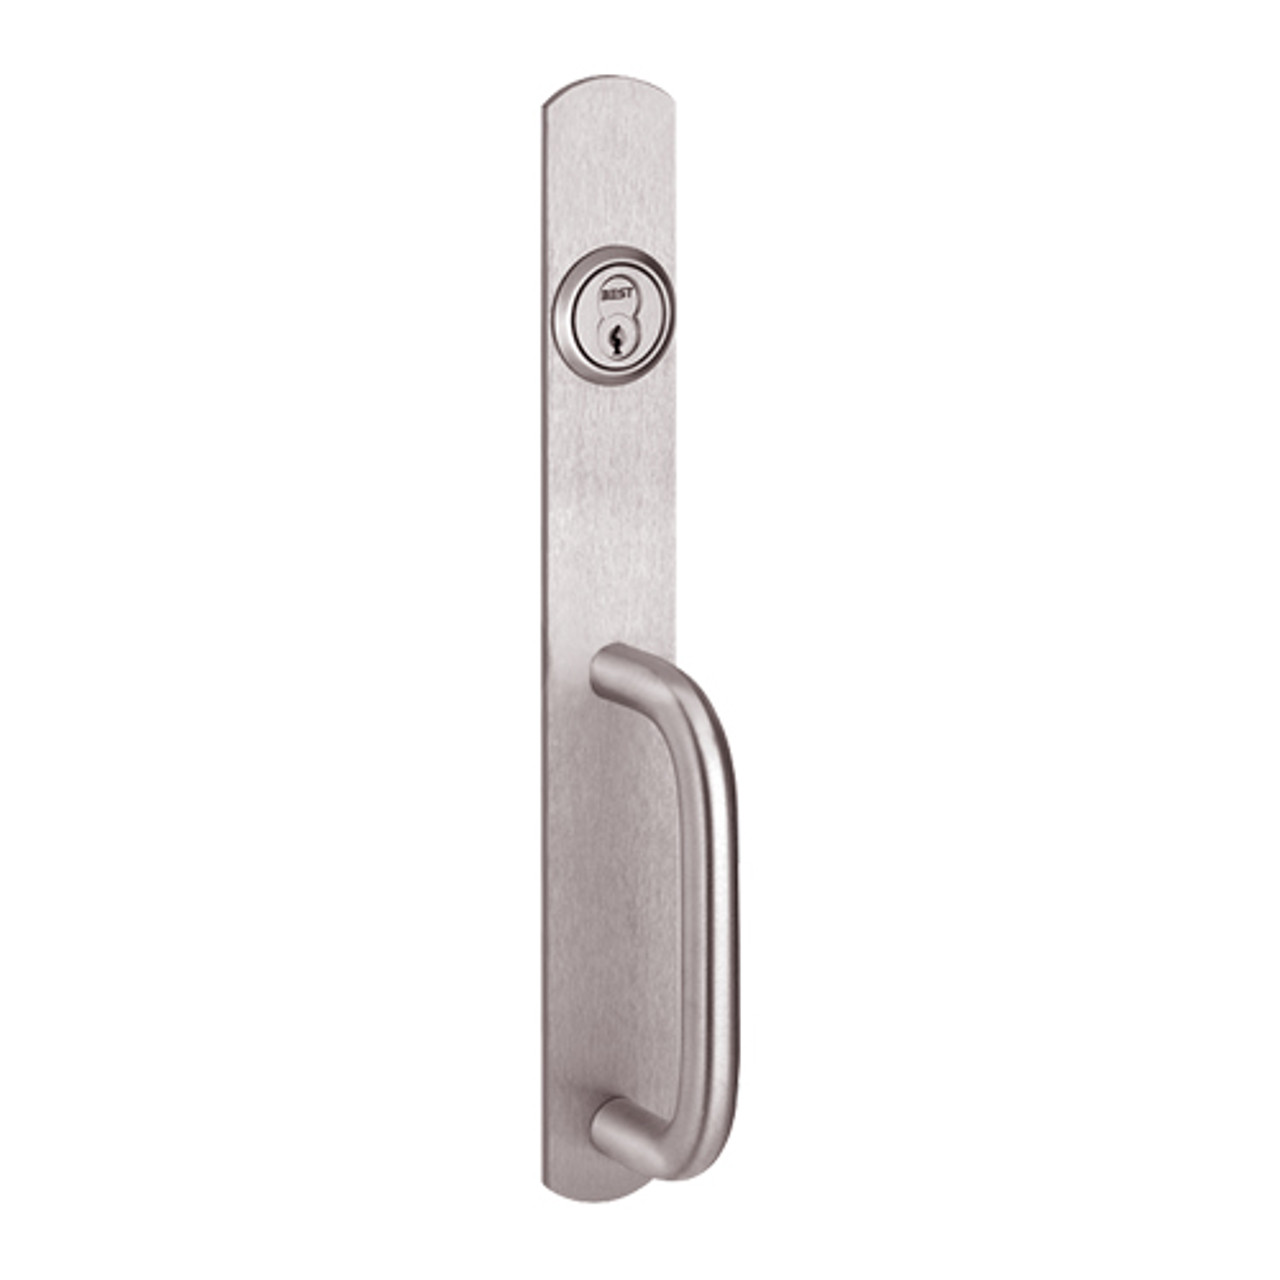 2005C-630 PHI Key Controls Thumb Piece Trim with C Design Pull for Apex Narrow Stile Device in Satin Stainless Steel Finish